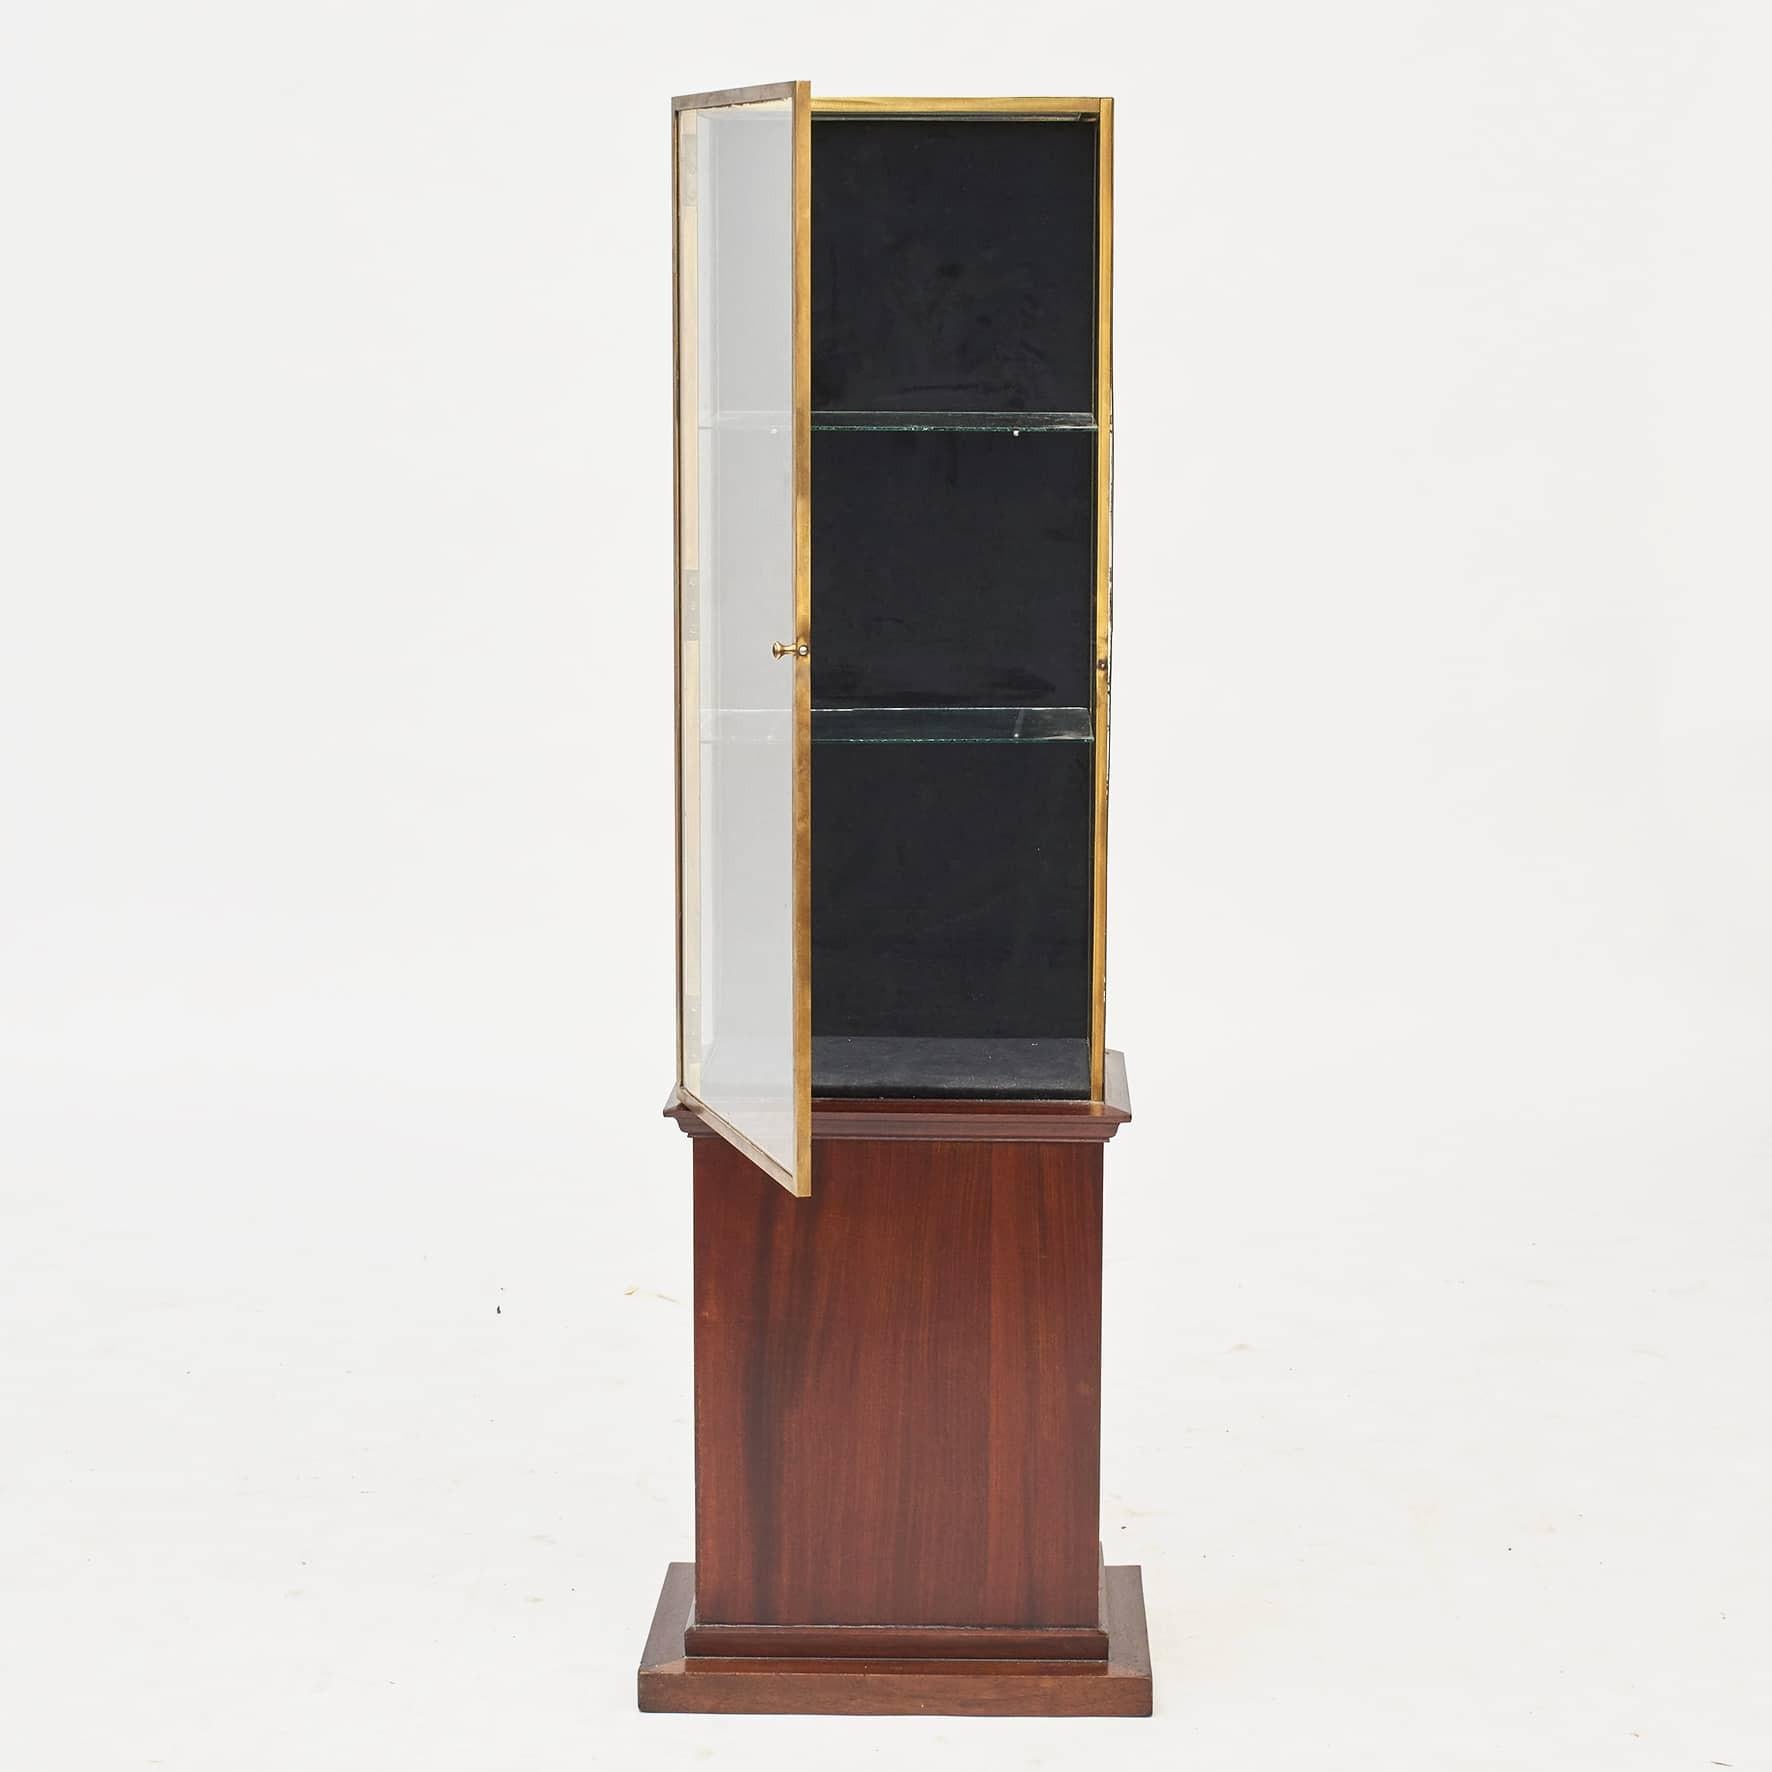 French Art Deco Glass and Brass Showcase, Mahogany Stand, France, C. 1920 In Good Condition For Sale In Kastrup, DK